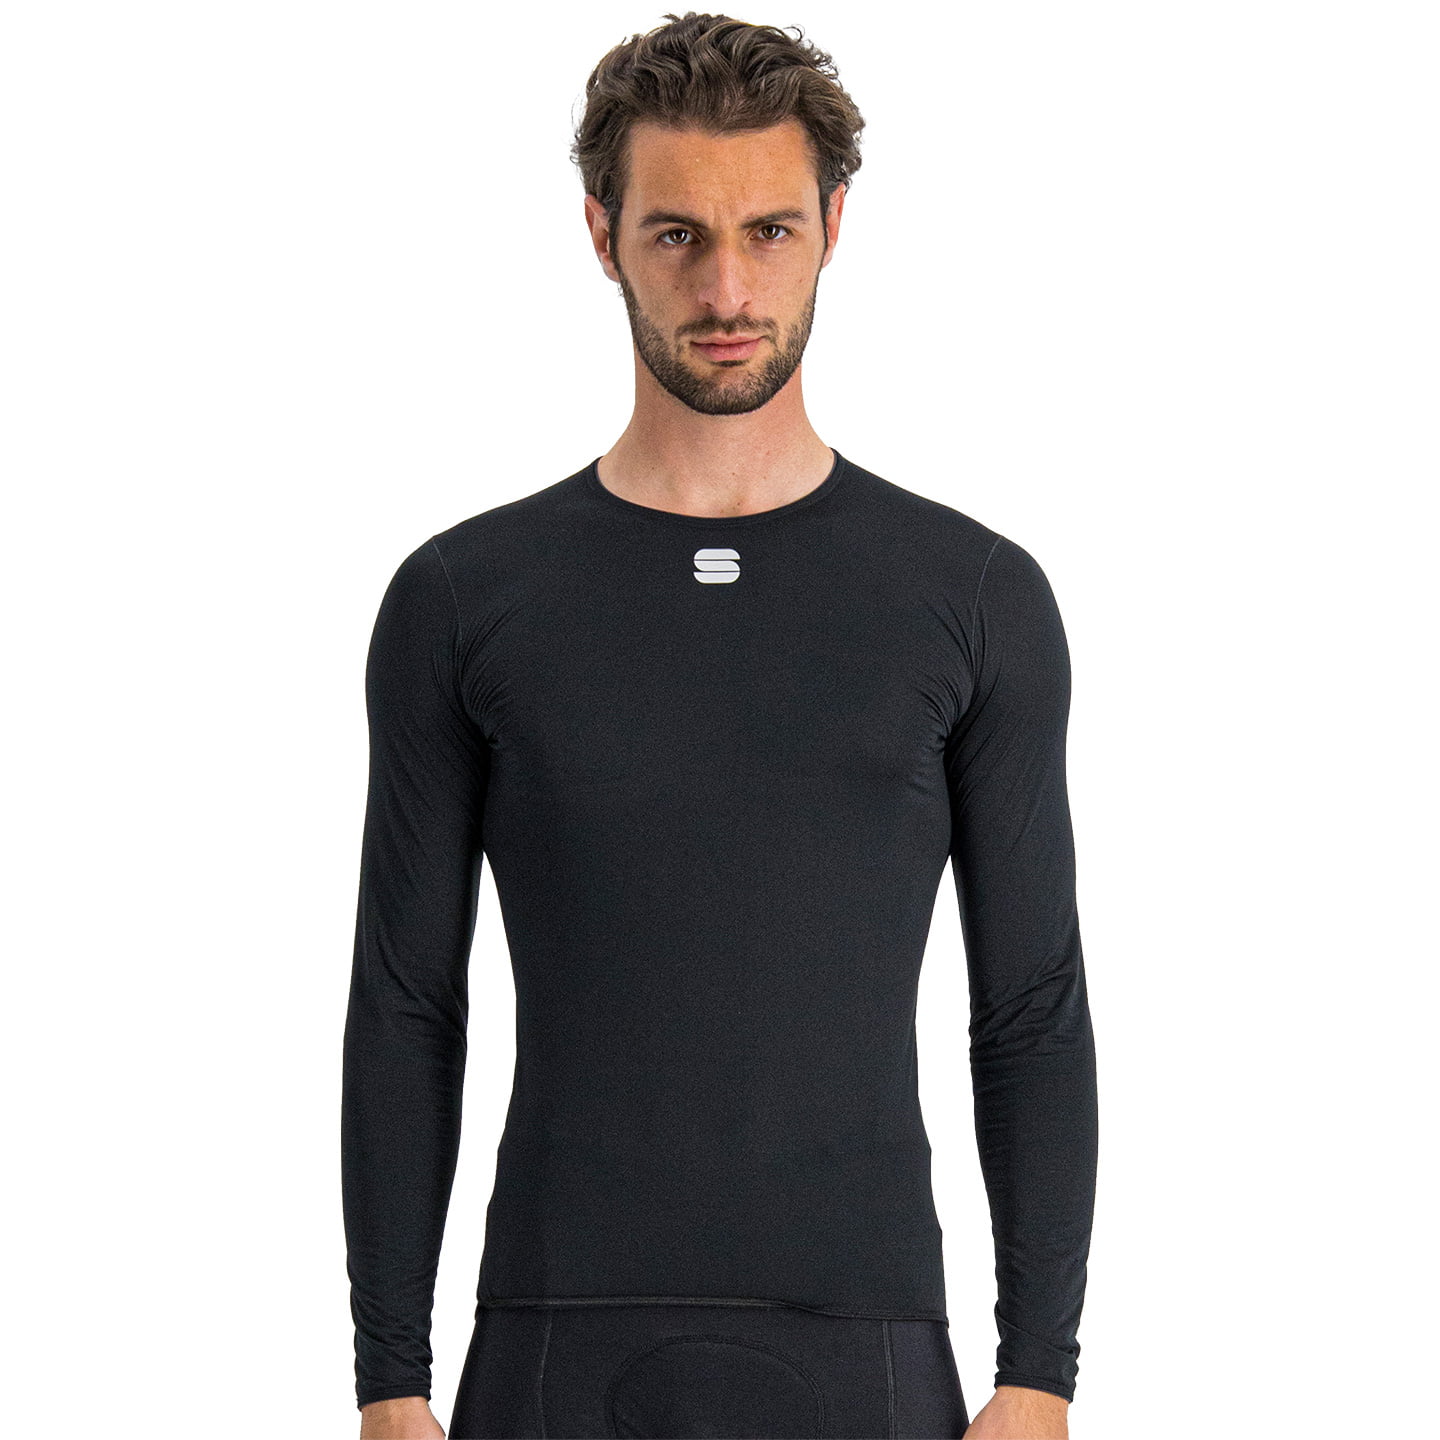 Sportful Midweight Long Sleeve Cycling Base Layer Base Layer, for men, size XL, Singlet, Cycling clothing